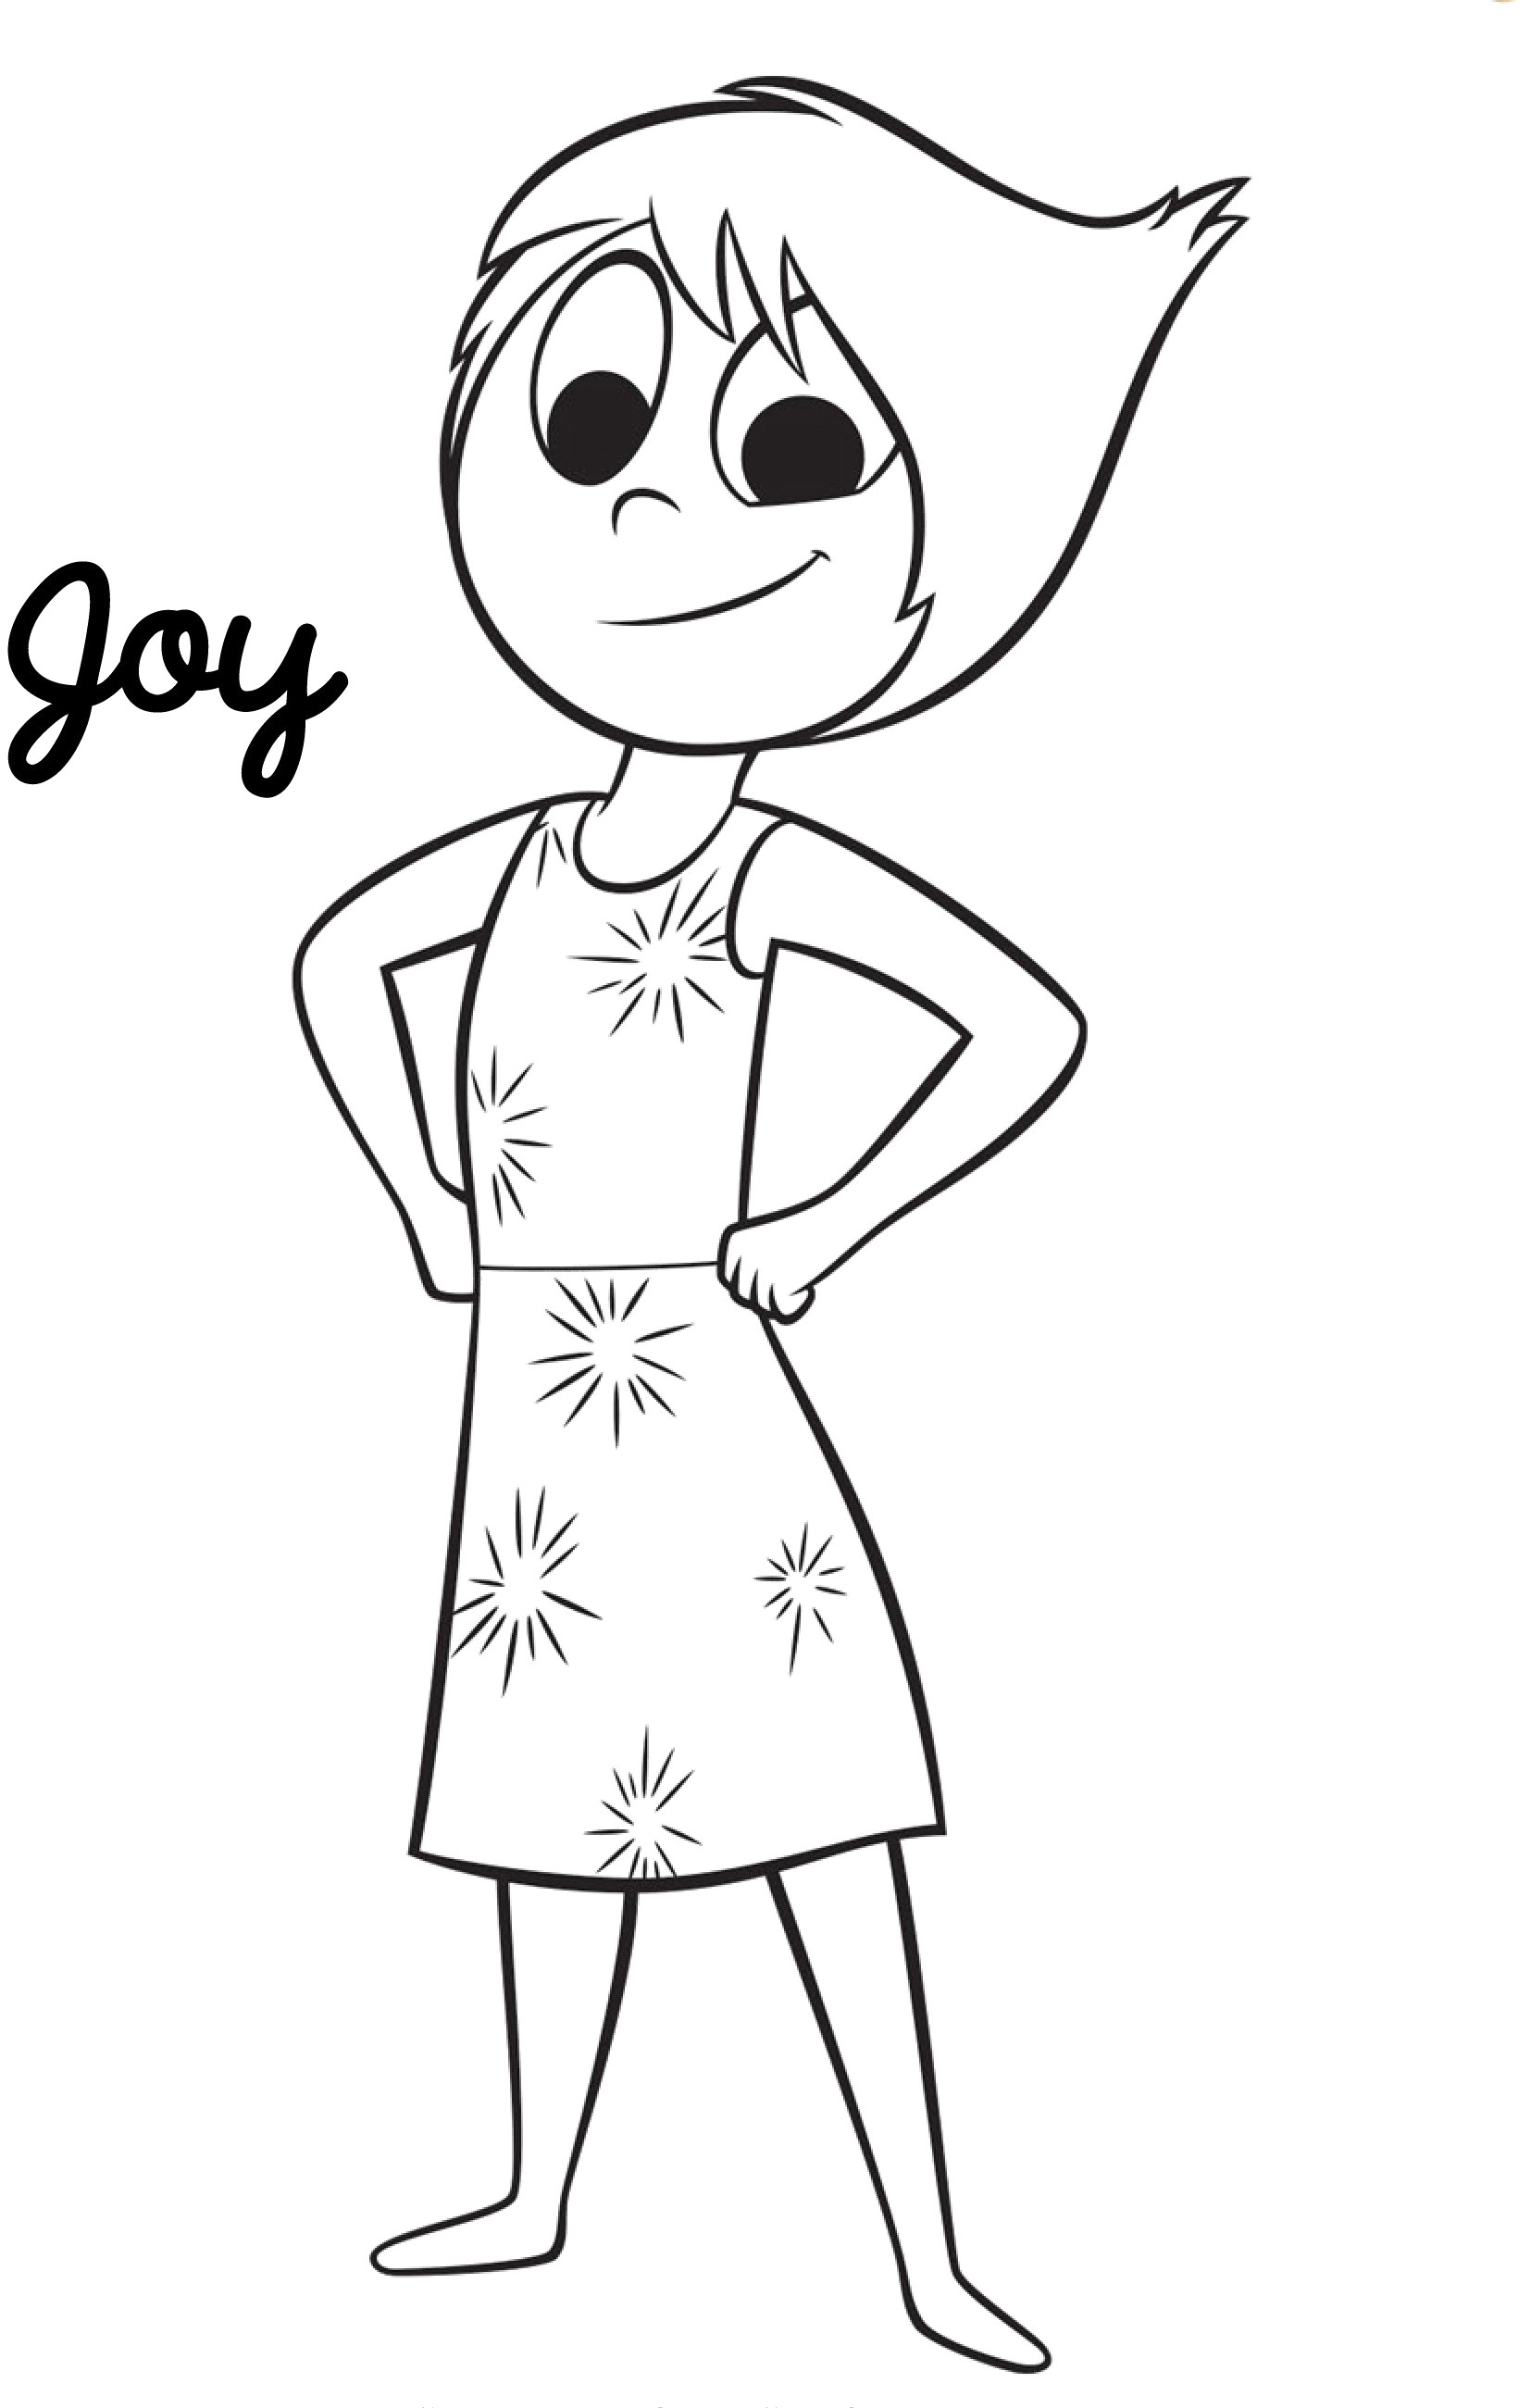 Inside Out Sadness Coloring Page Coloring Pages Inside Out Sadness Sleekads